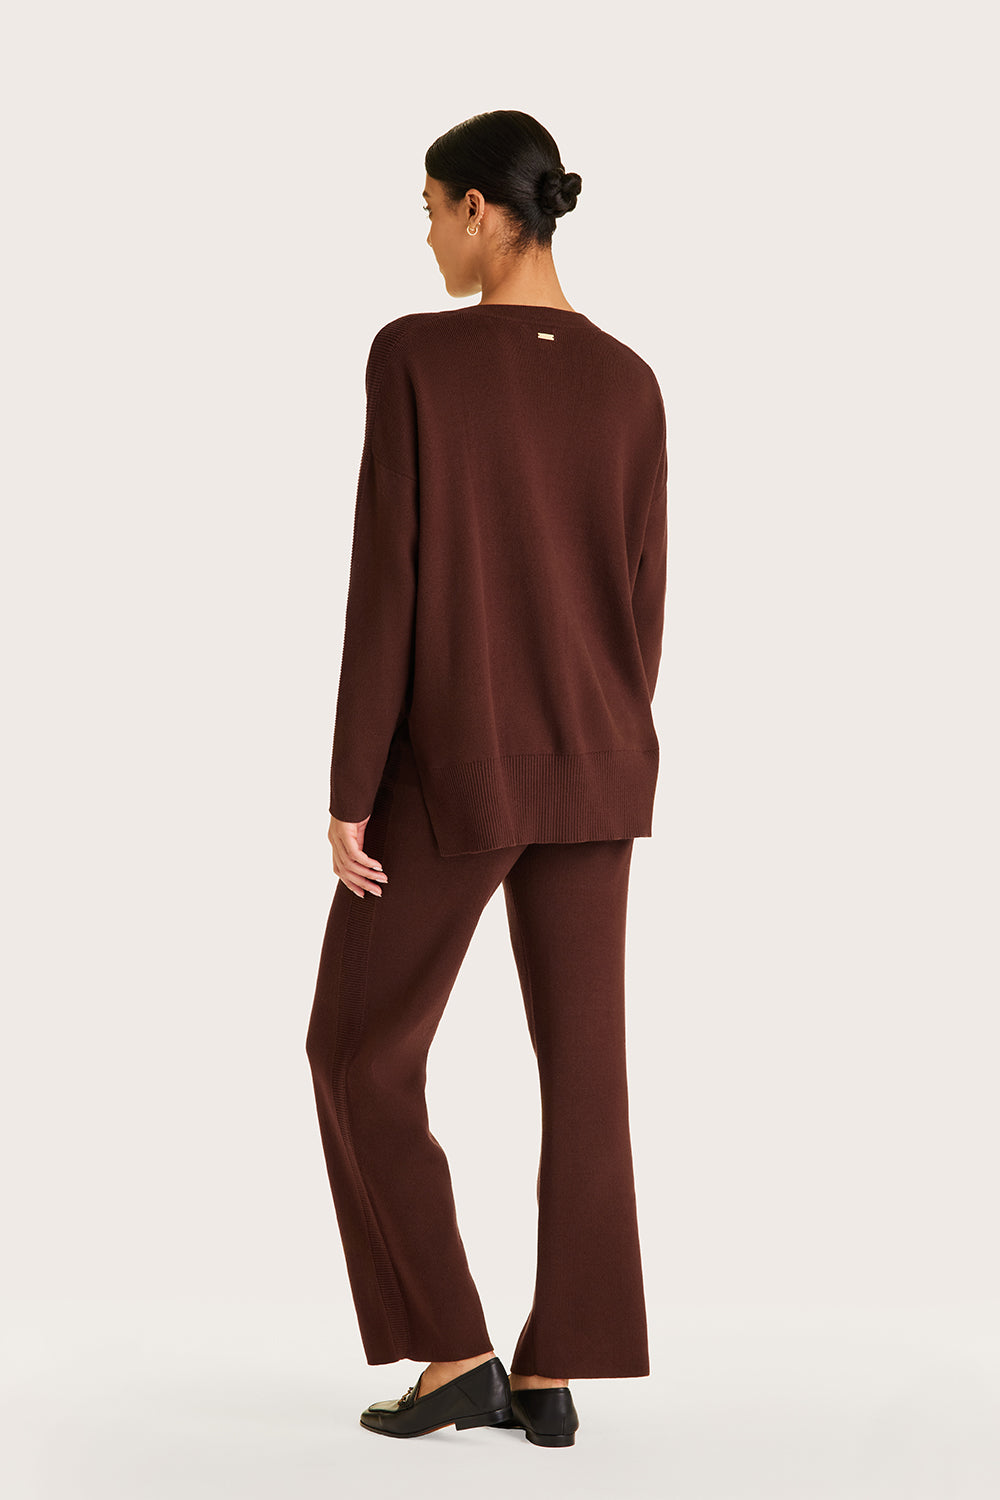 Alala women's knit sweater with buttons in brown